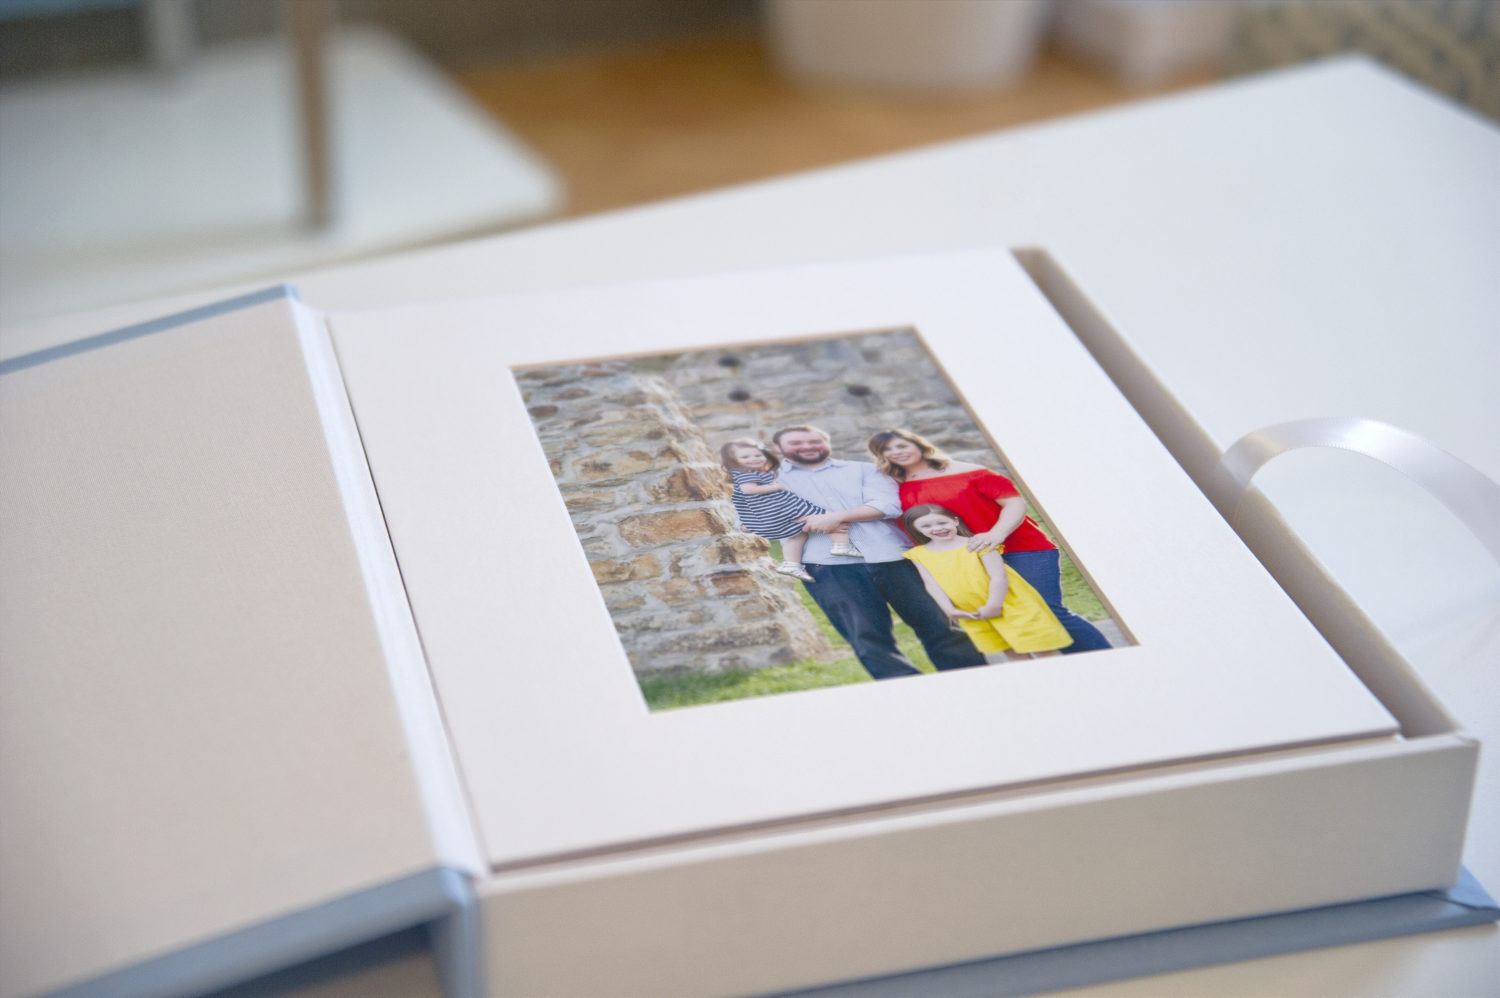 Matted photos in a collection box